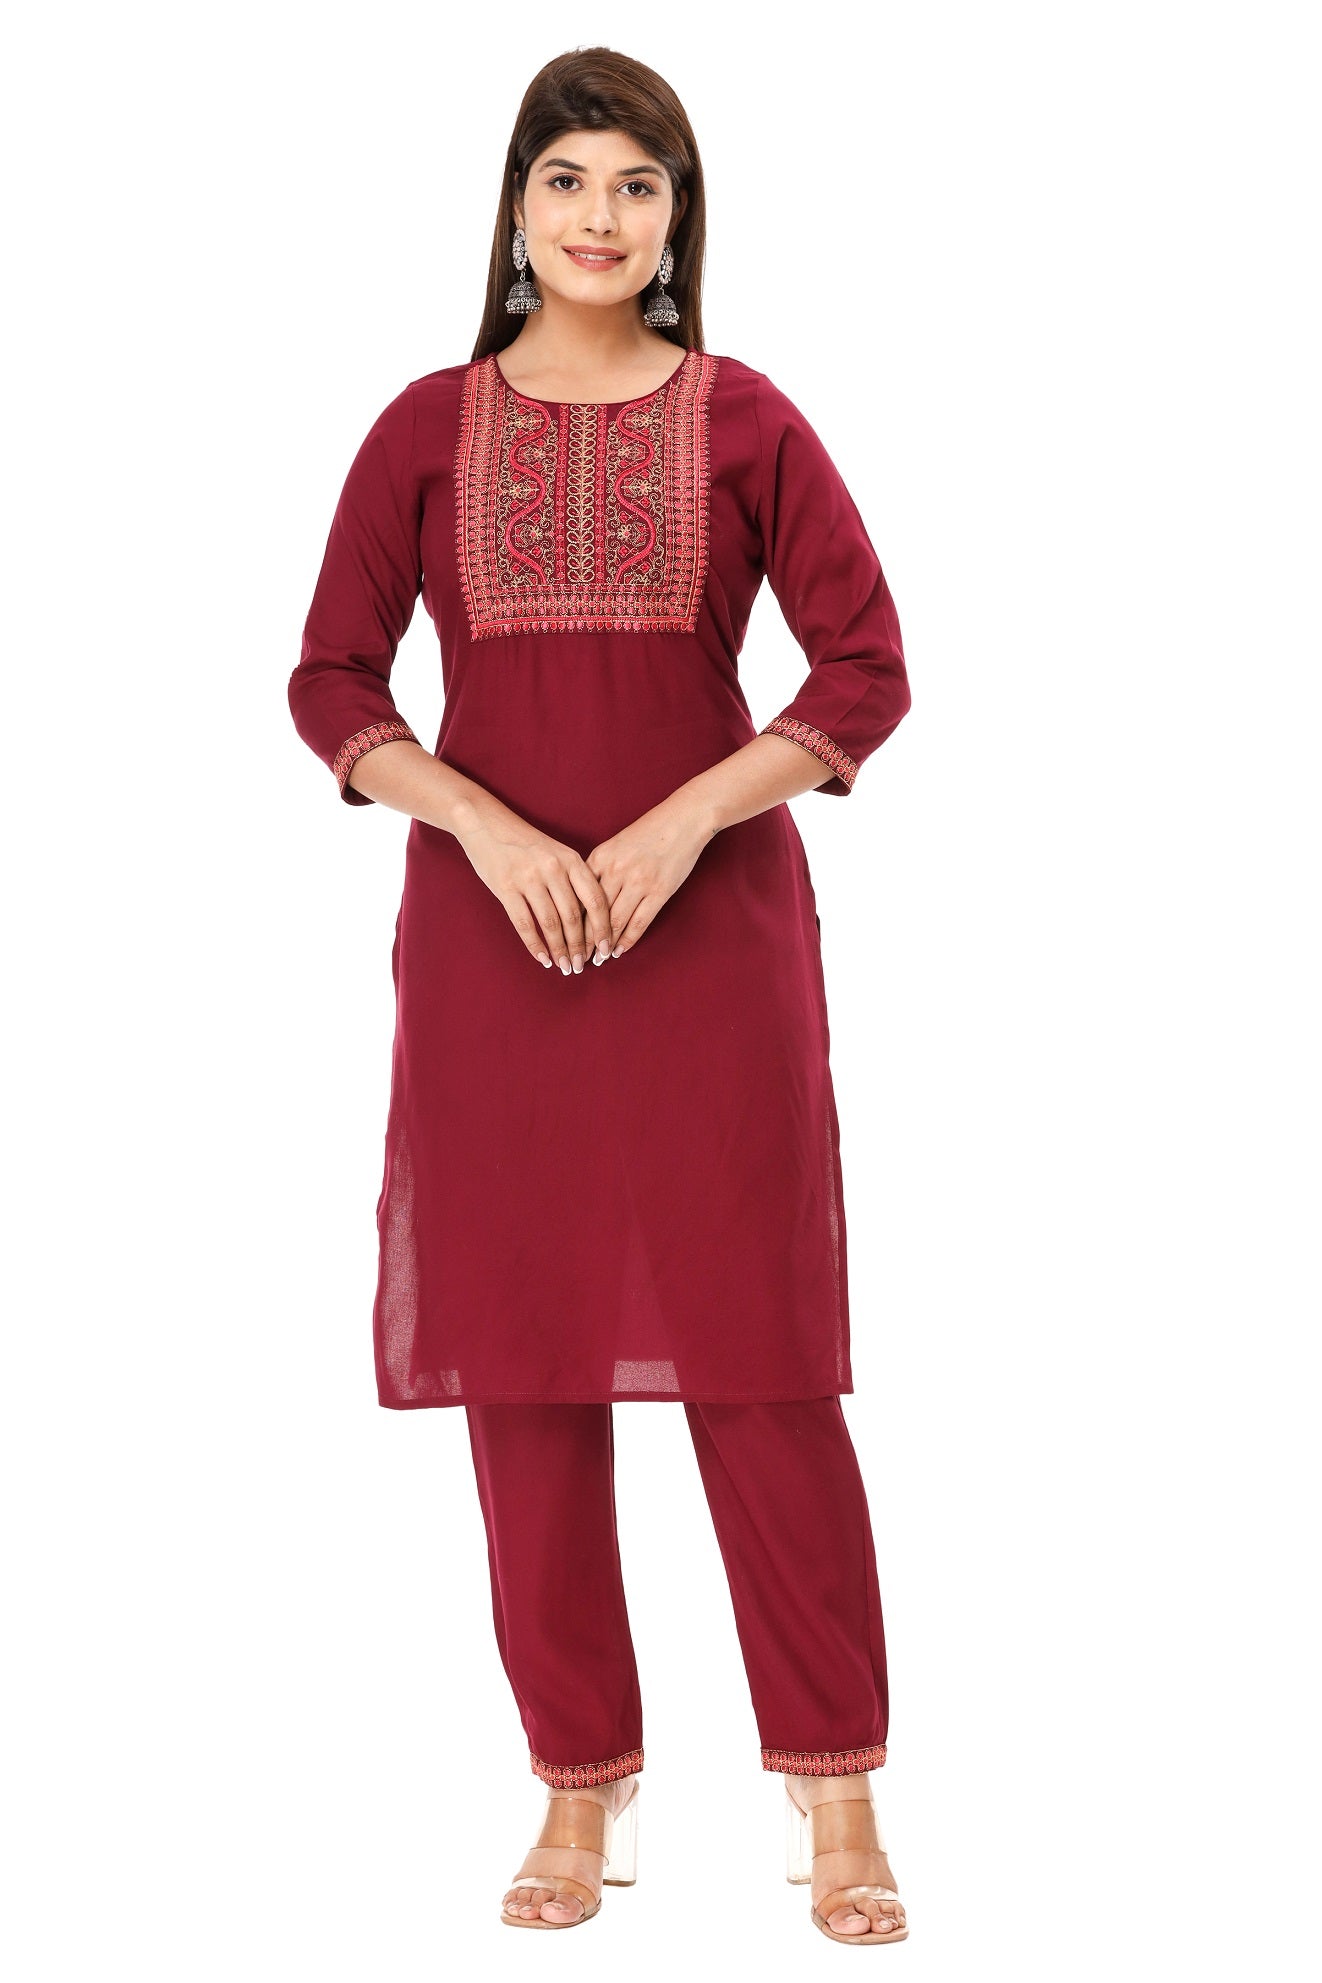 Pretty Indian Female Model Girl Wearing a Traditional Kurti Stock Image -  Image of indian, background: 95101191